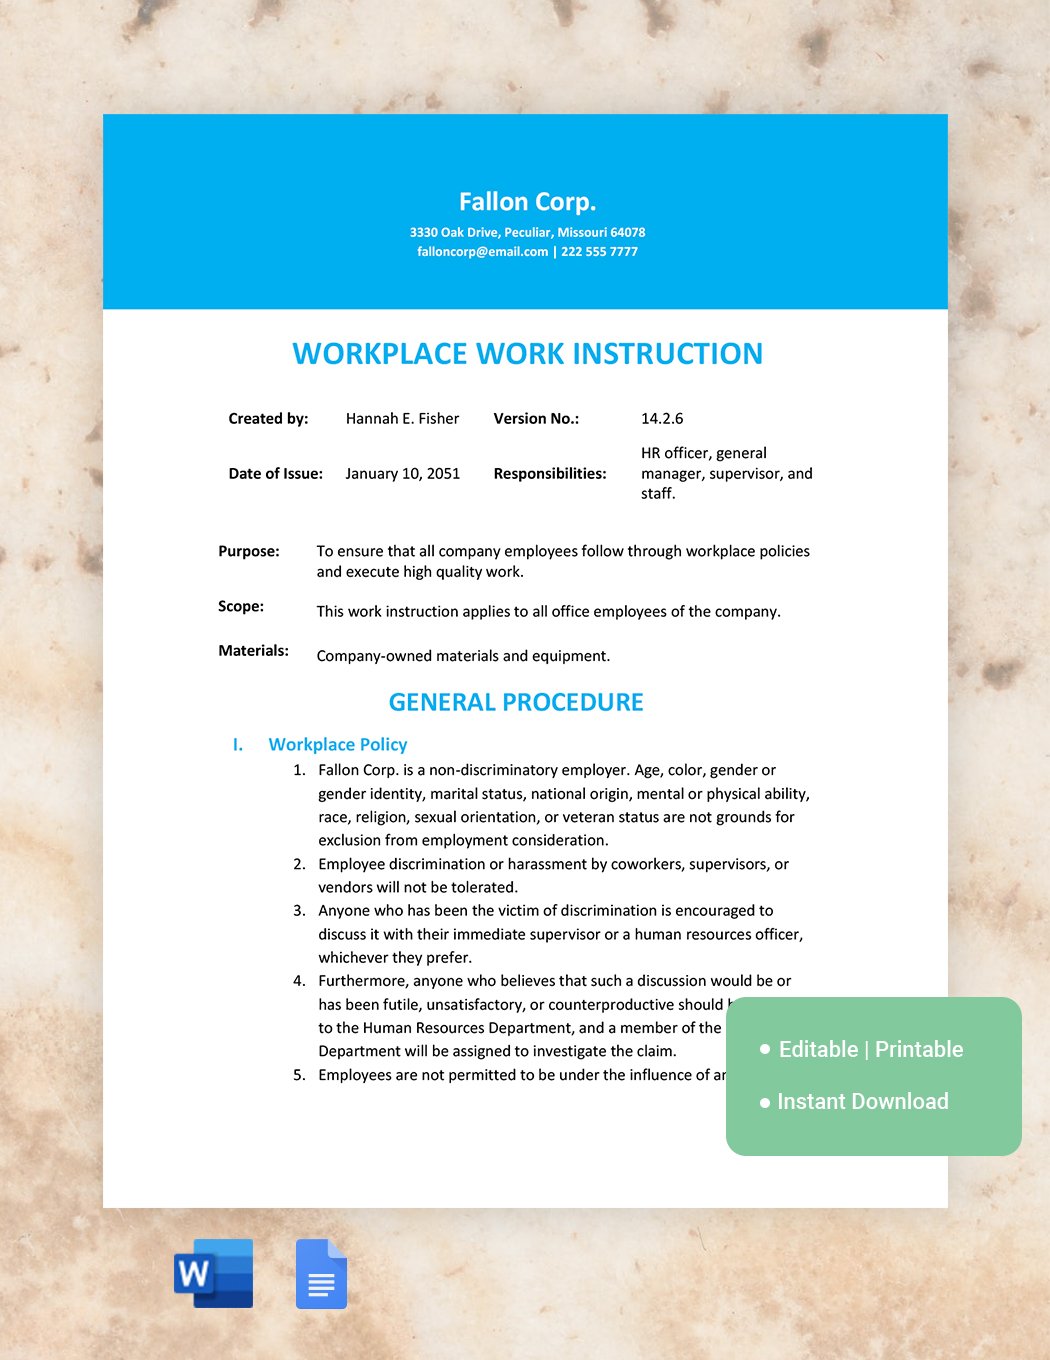 Workplace Work Instruction Template in Word, Google Docs